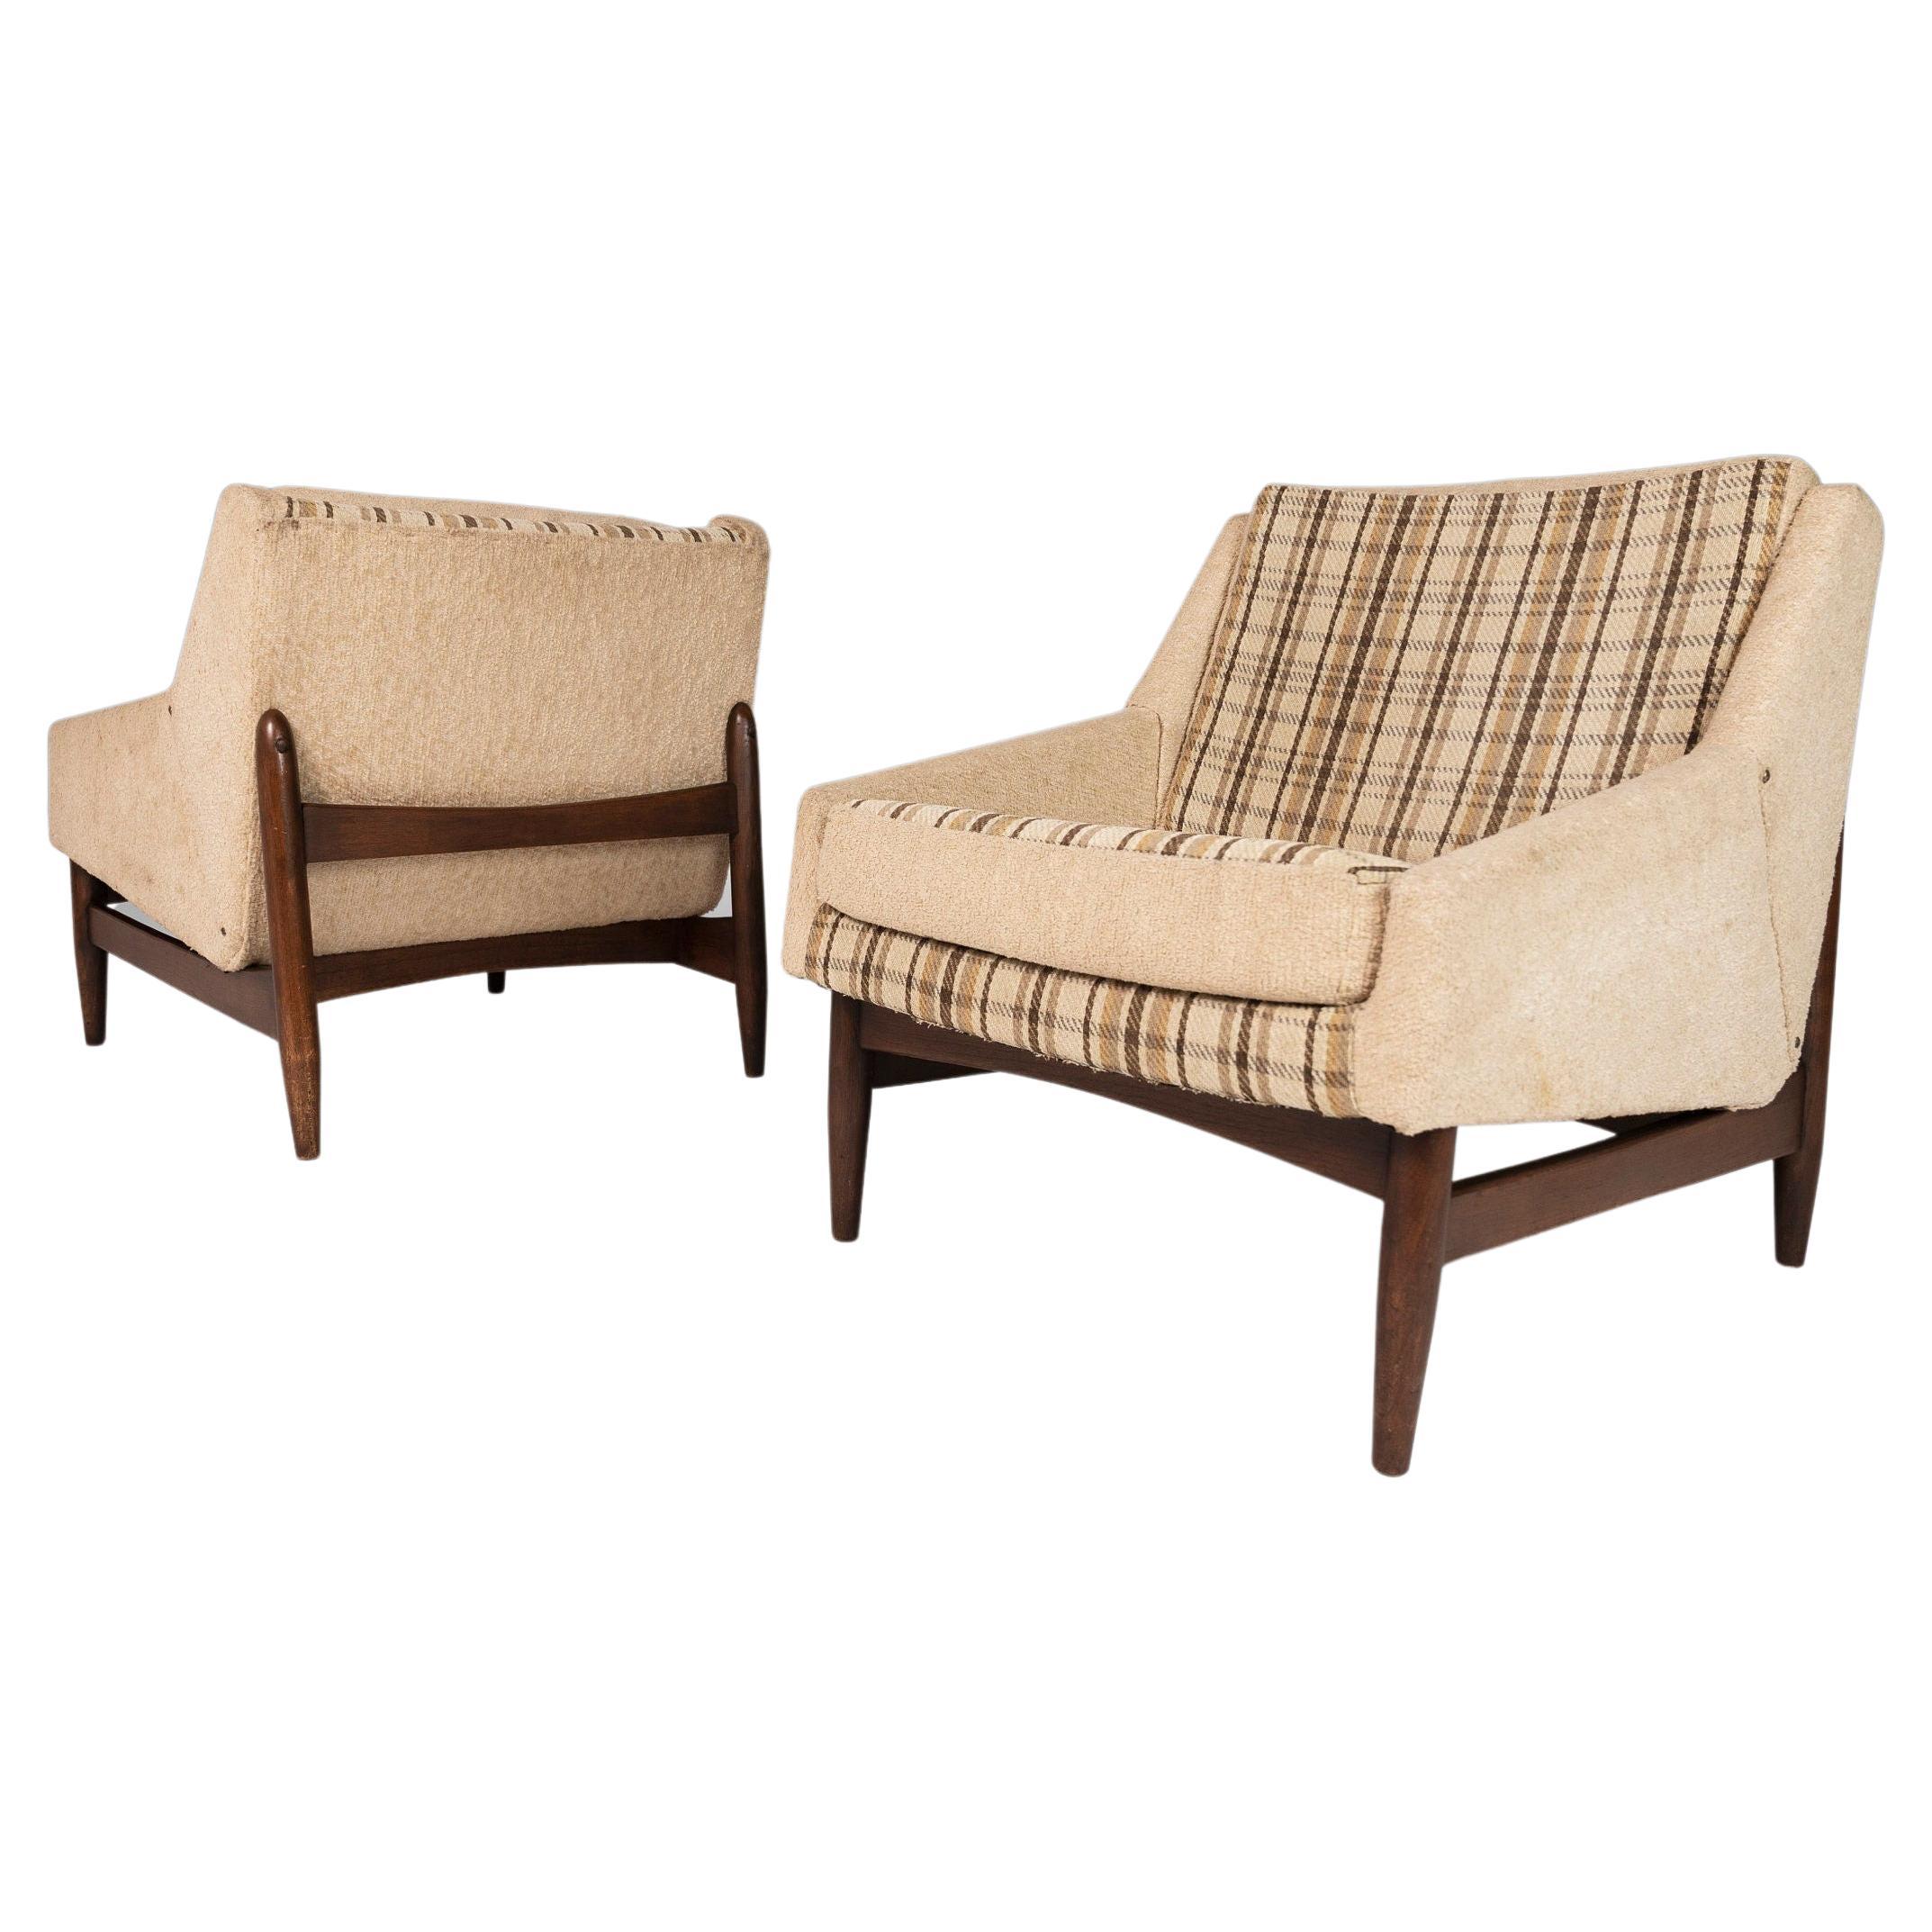 Set of Two (2) Danish Modern Floating Lounge Chairs on Walnut Frames, 1960's For Sale